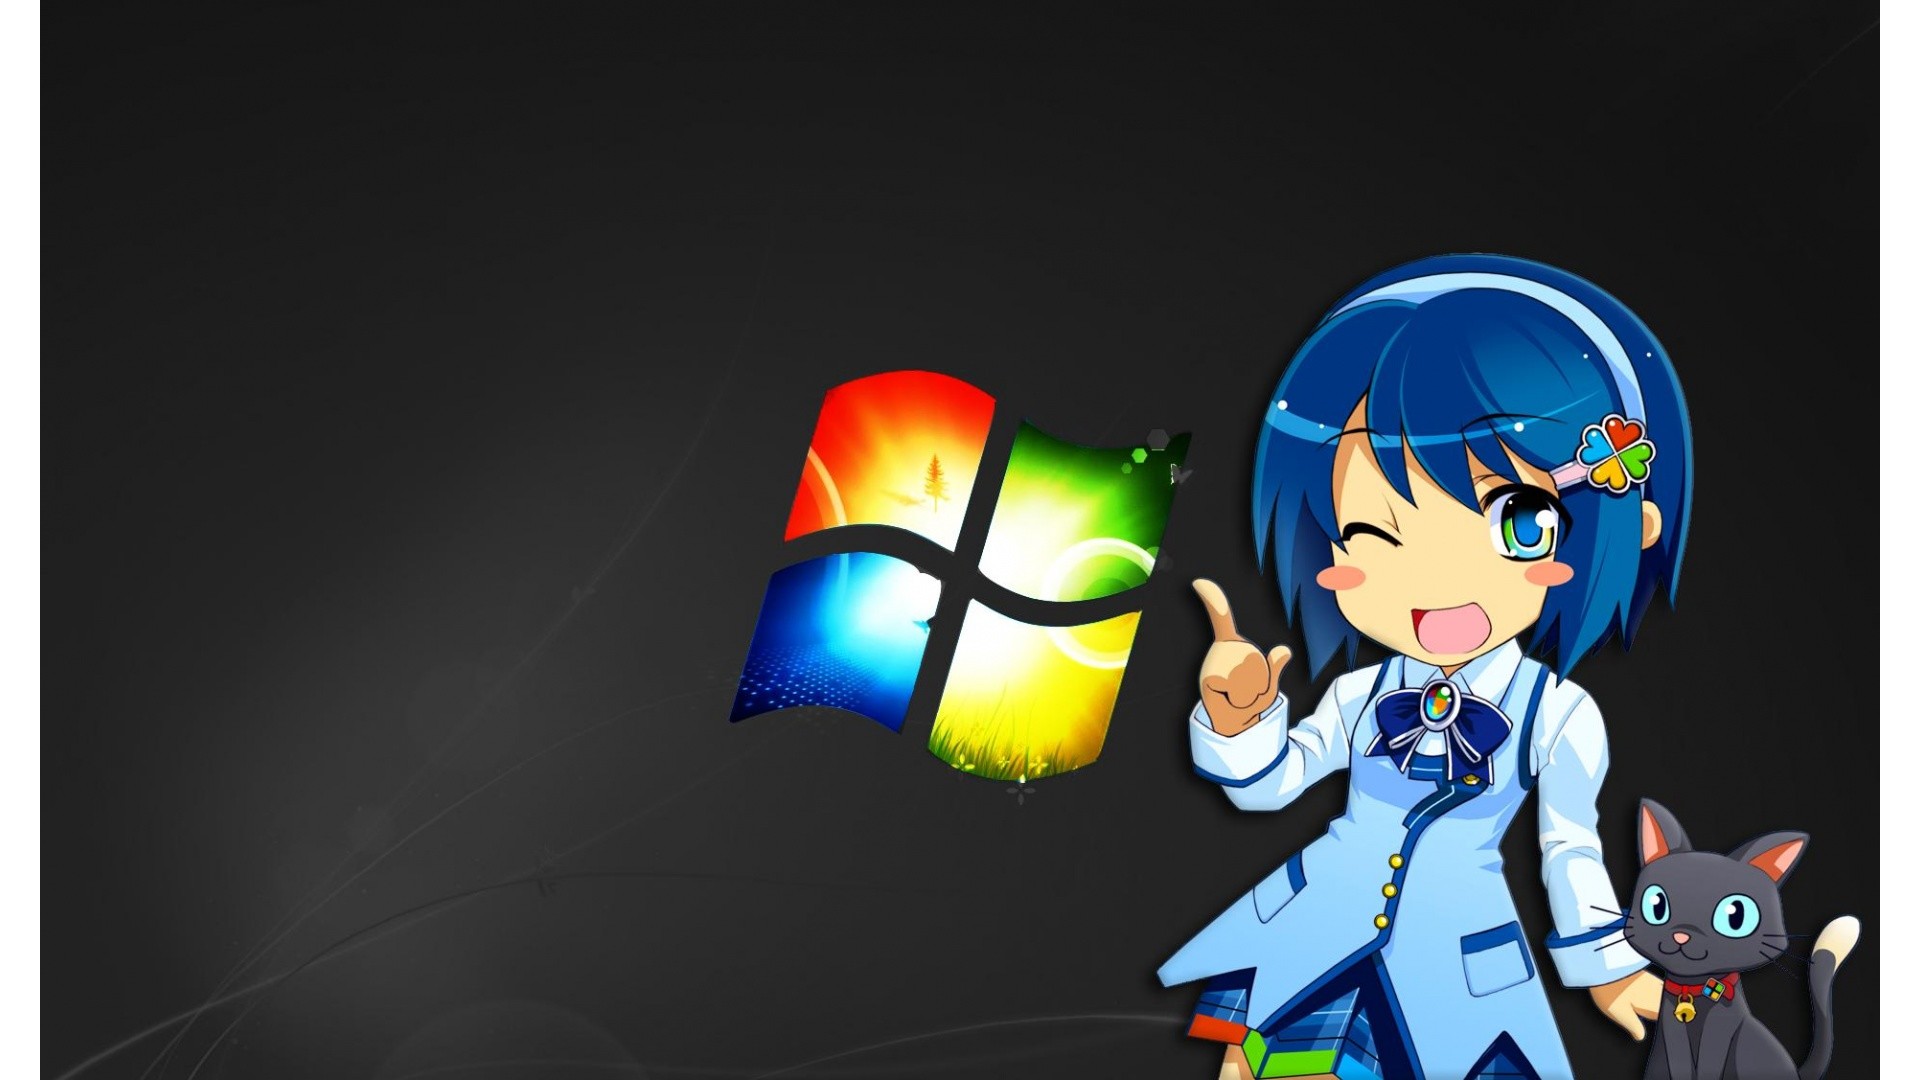 download anime theme for windows 10 pro